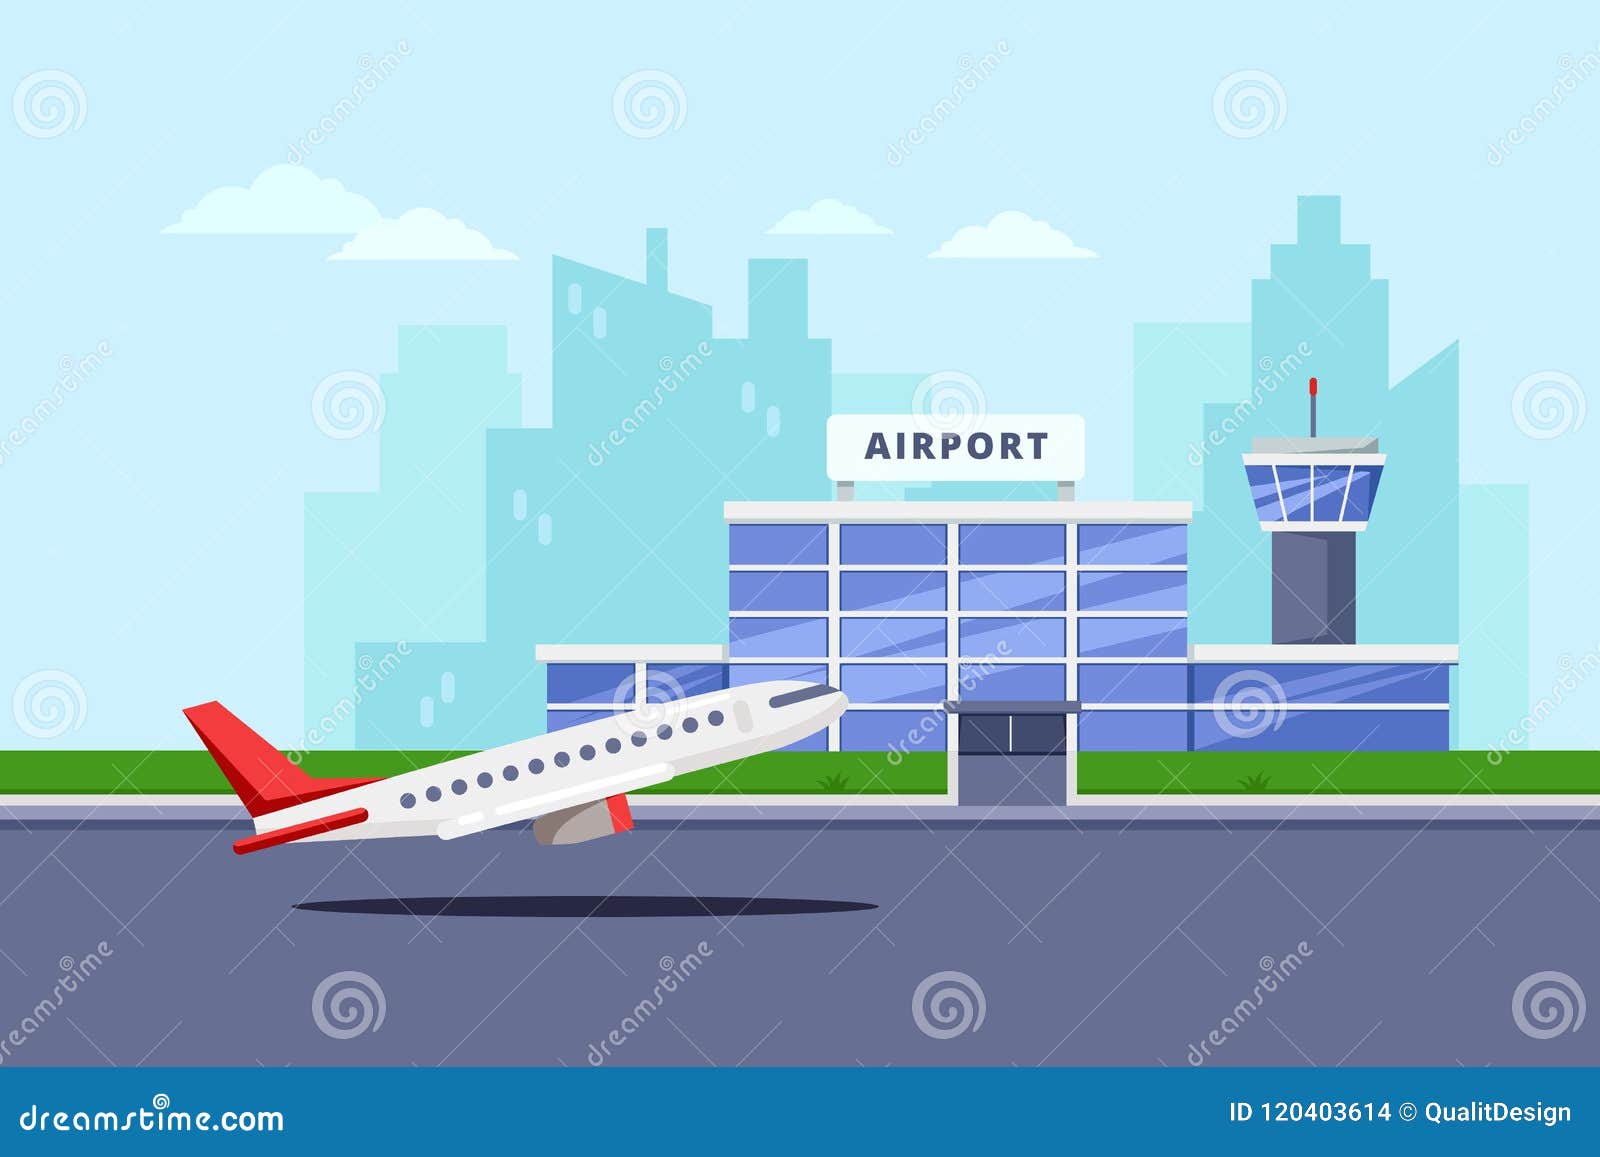 airport terminal building and taking off aircraft,  flat . air travel background and  s